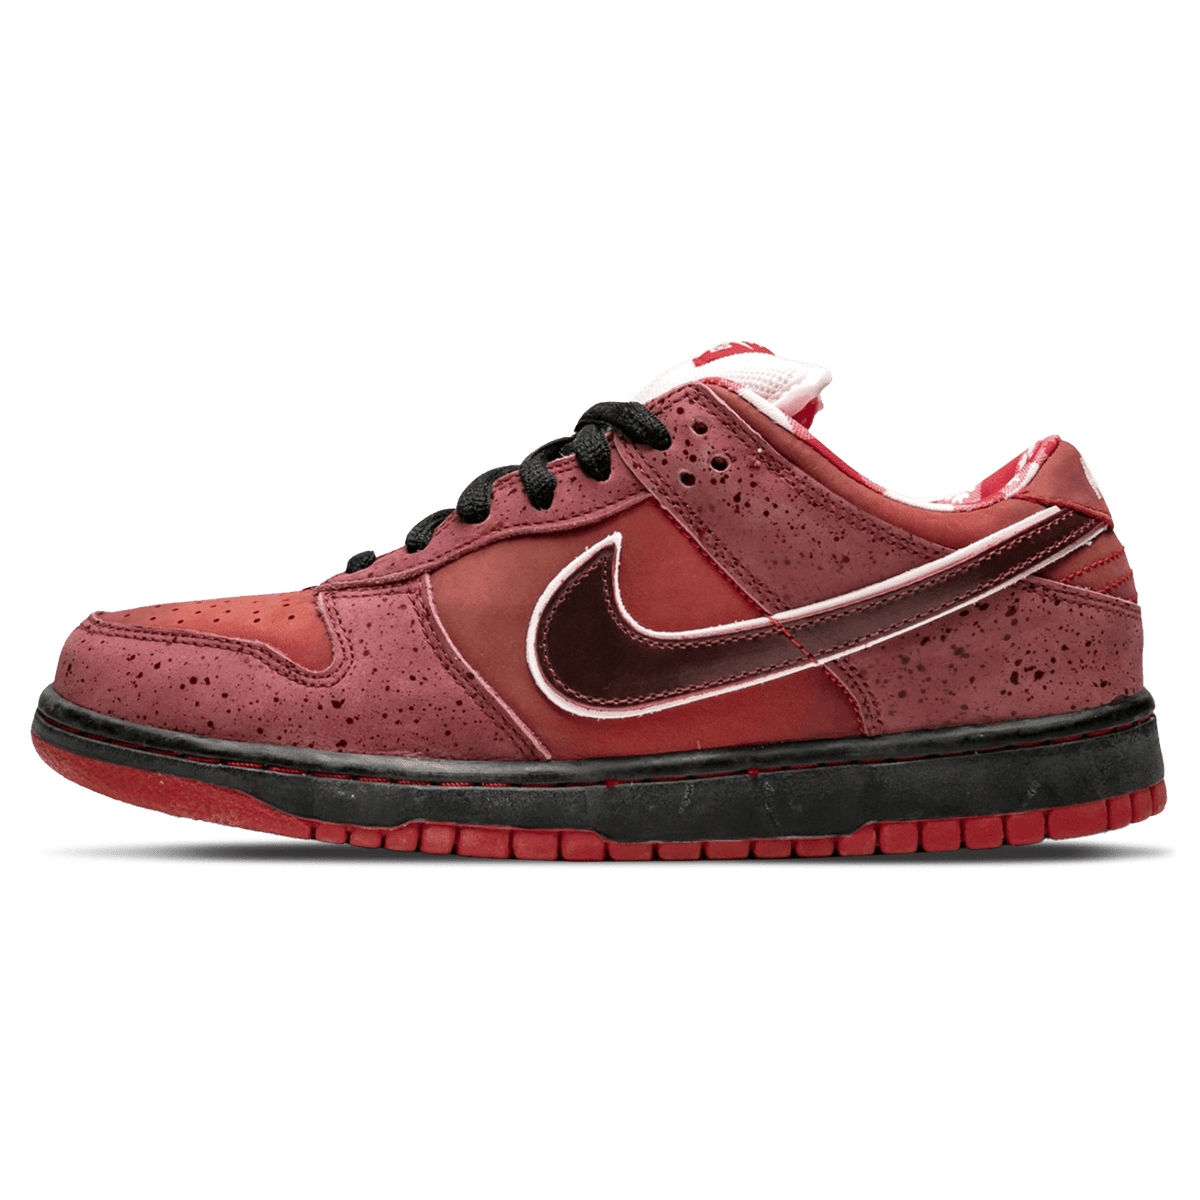 nike dunk sb low red lobster 313170 661 1